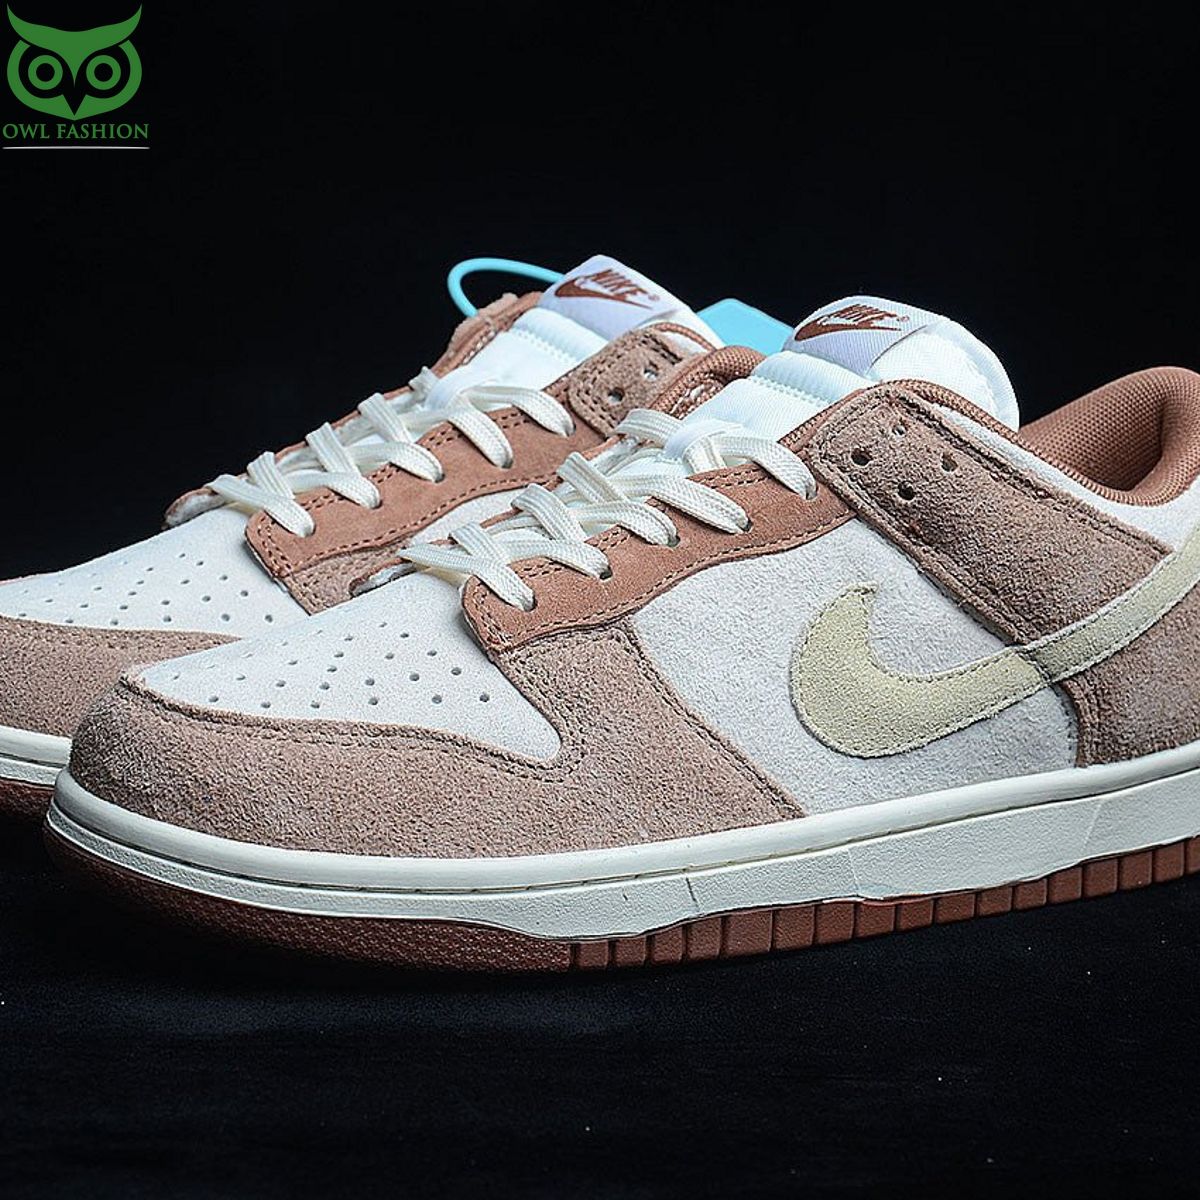 Nike Dunk Low Premium Medium Curry Shoes Sneakers Eye soothing picture dear